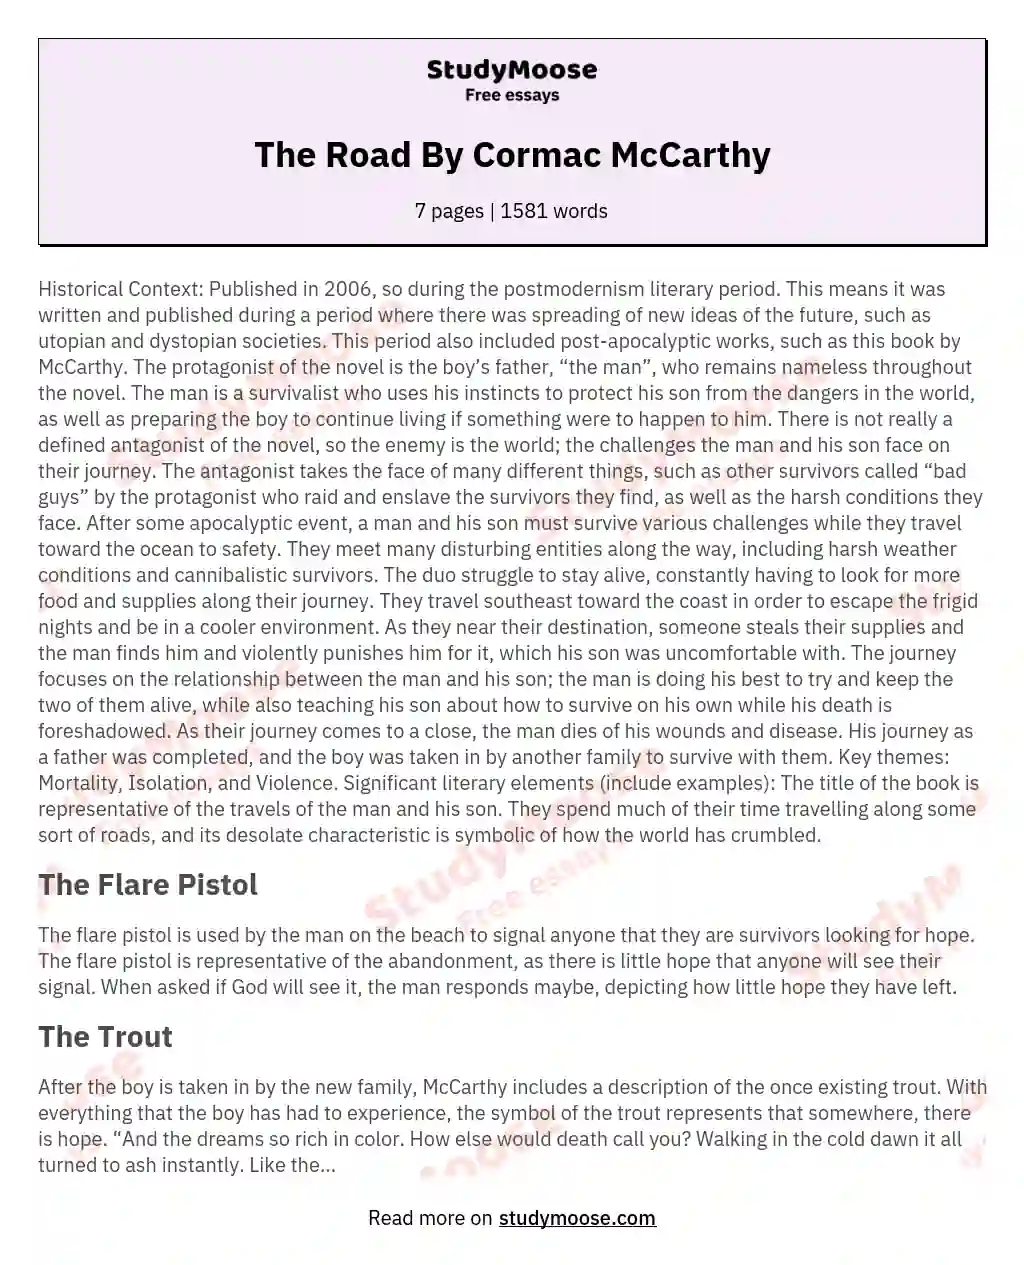 The Road By Cormac McCarthy essay